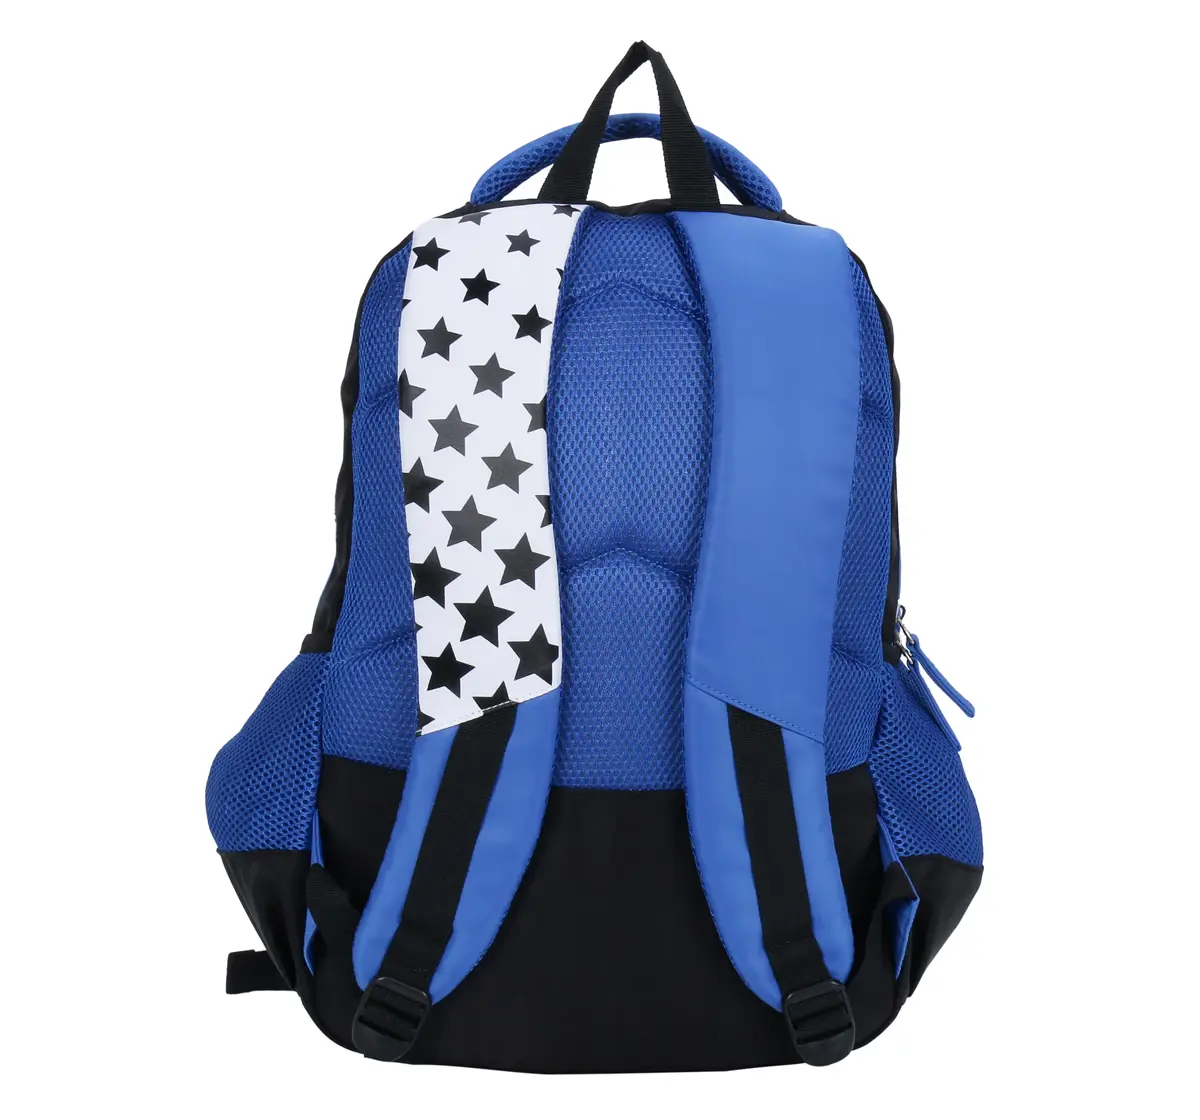 Simba Gravity Build The Future 19 Backpack Multicolor 3Y+